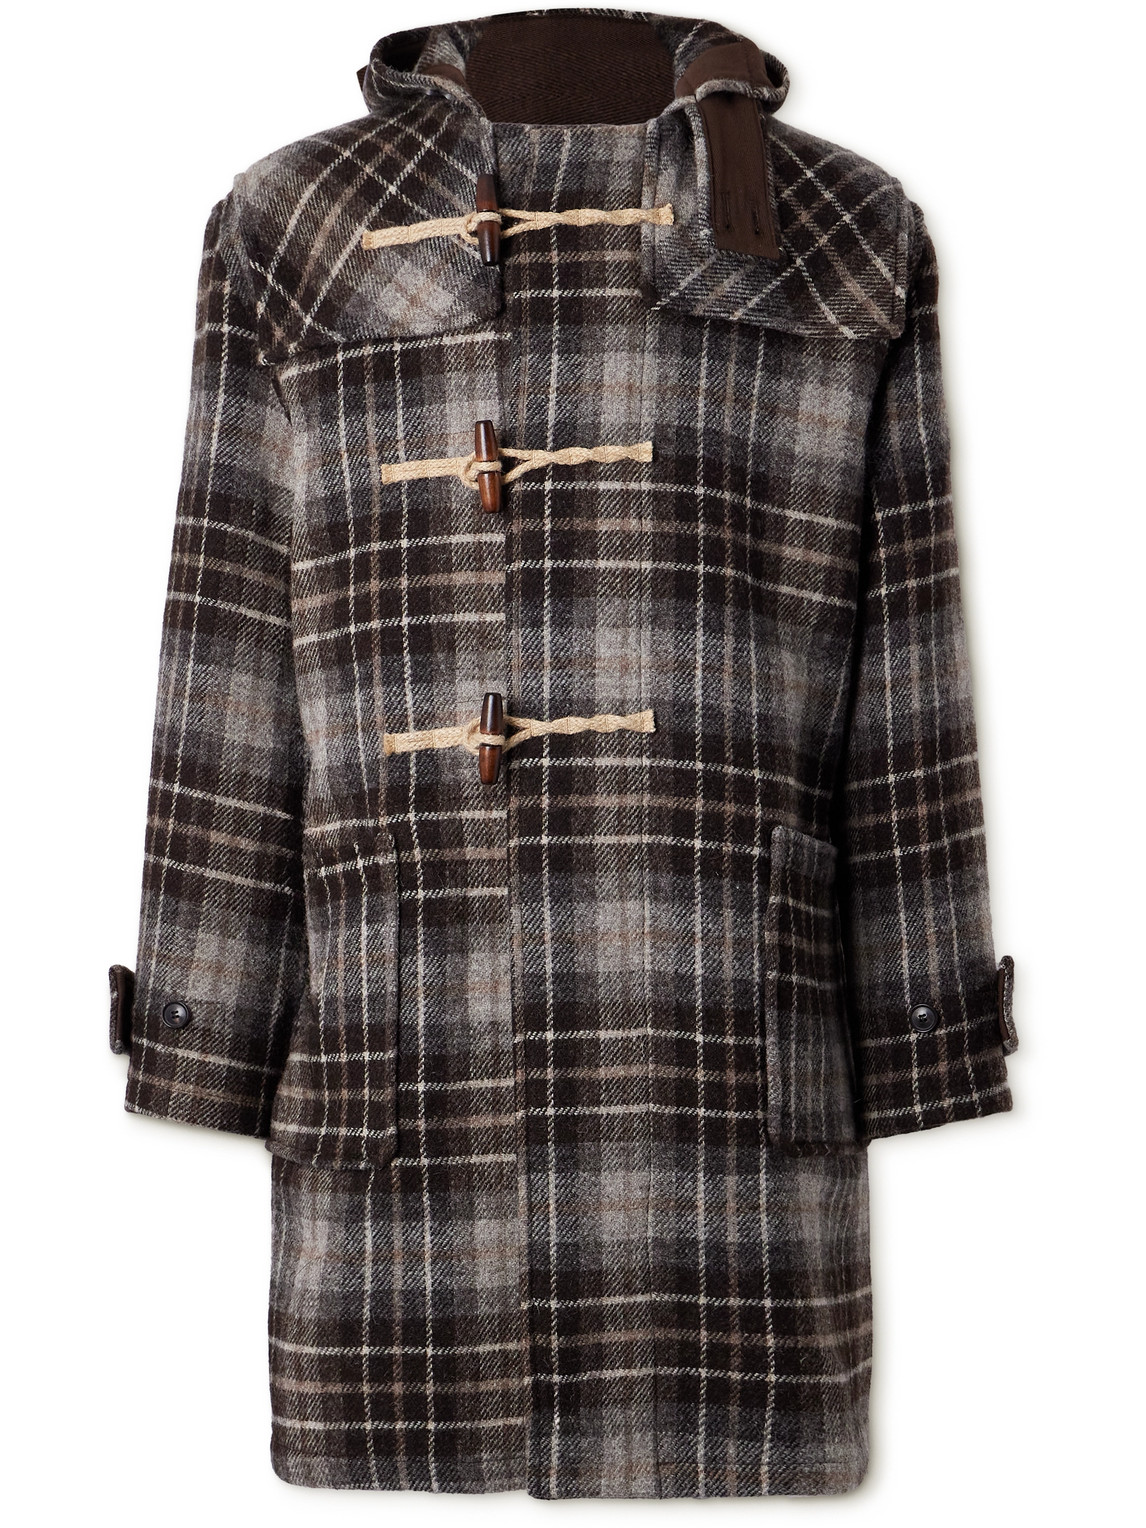 Gloverall Checked Wool-Tweed Hooded Coat